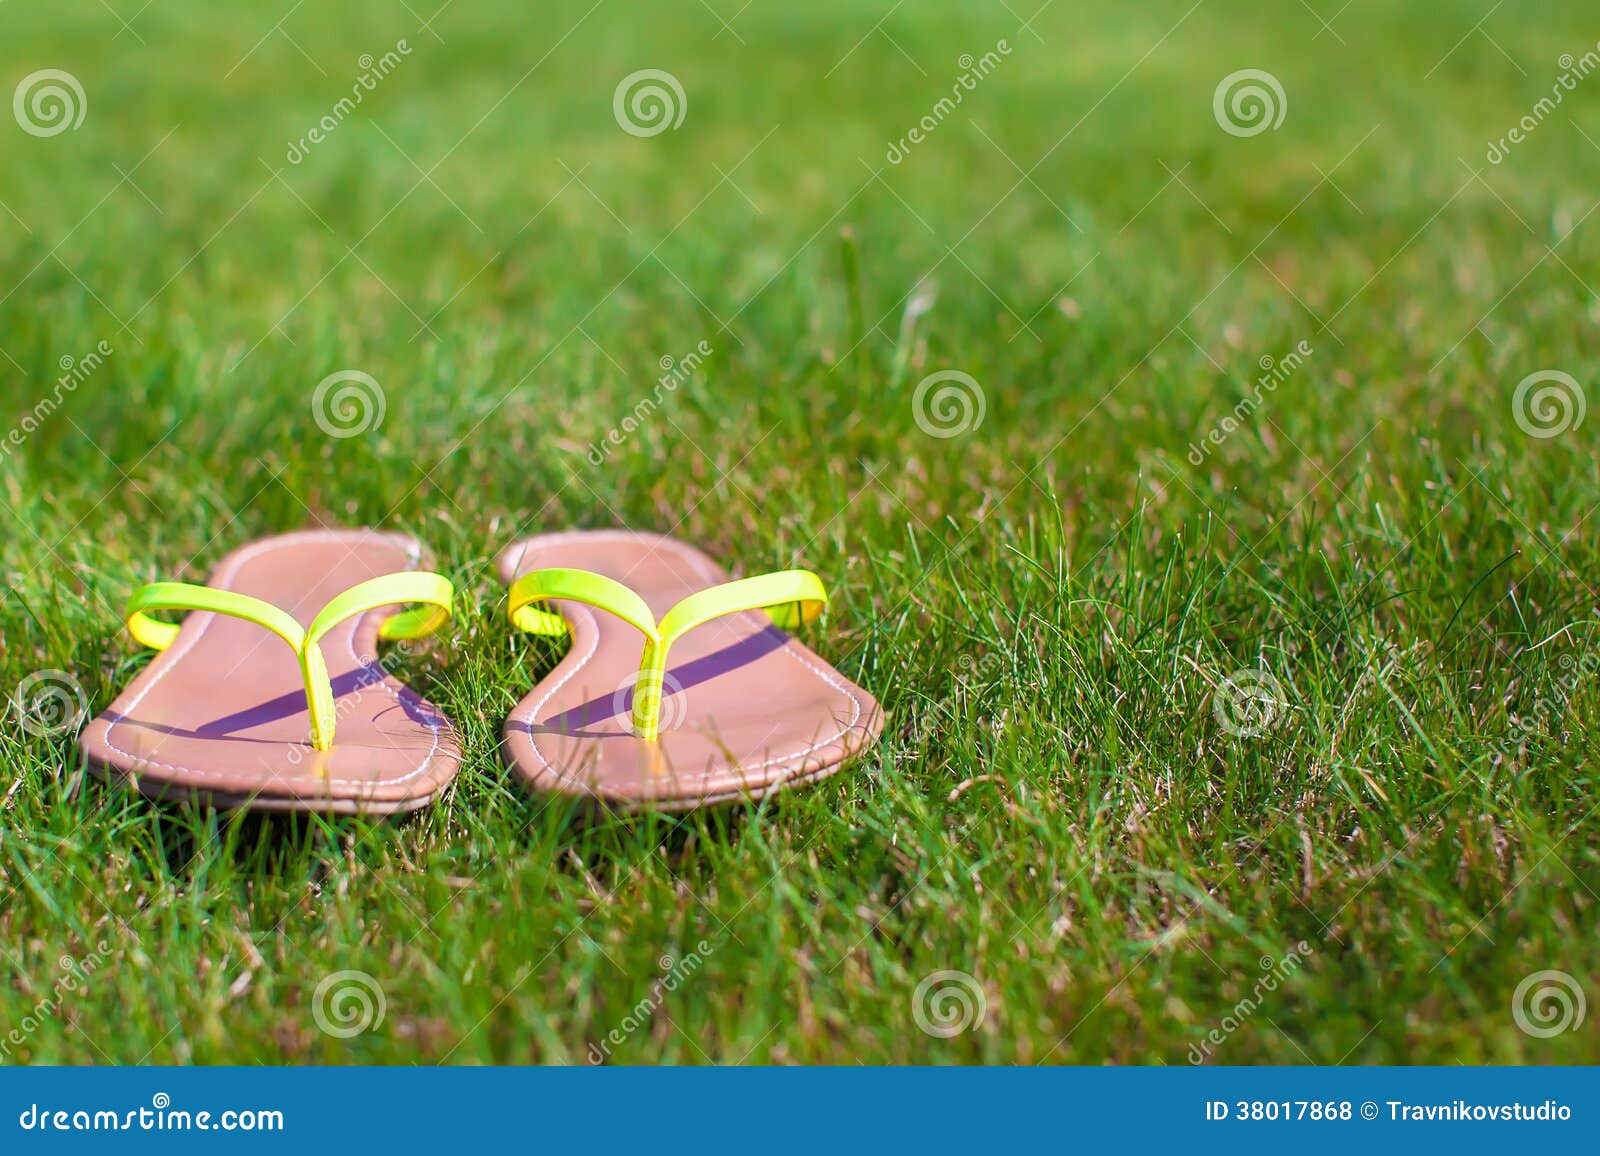 Closeup of Bright Flip Flops on Green Grass Stock Photo - Image of ...